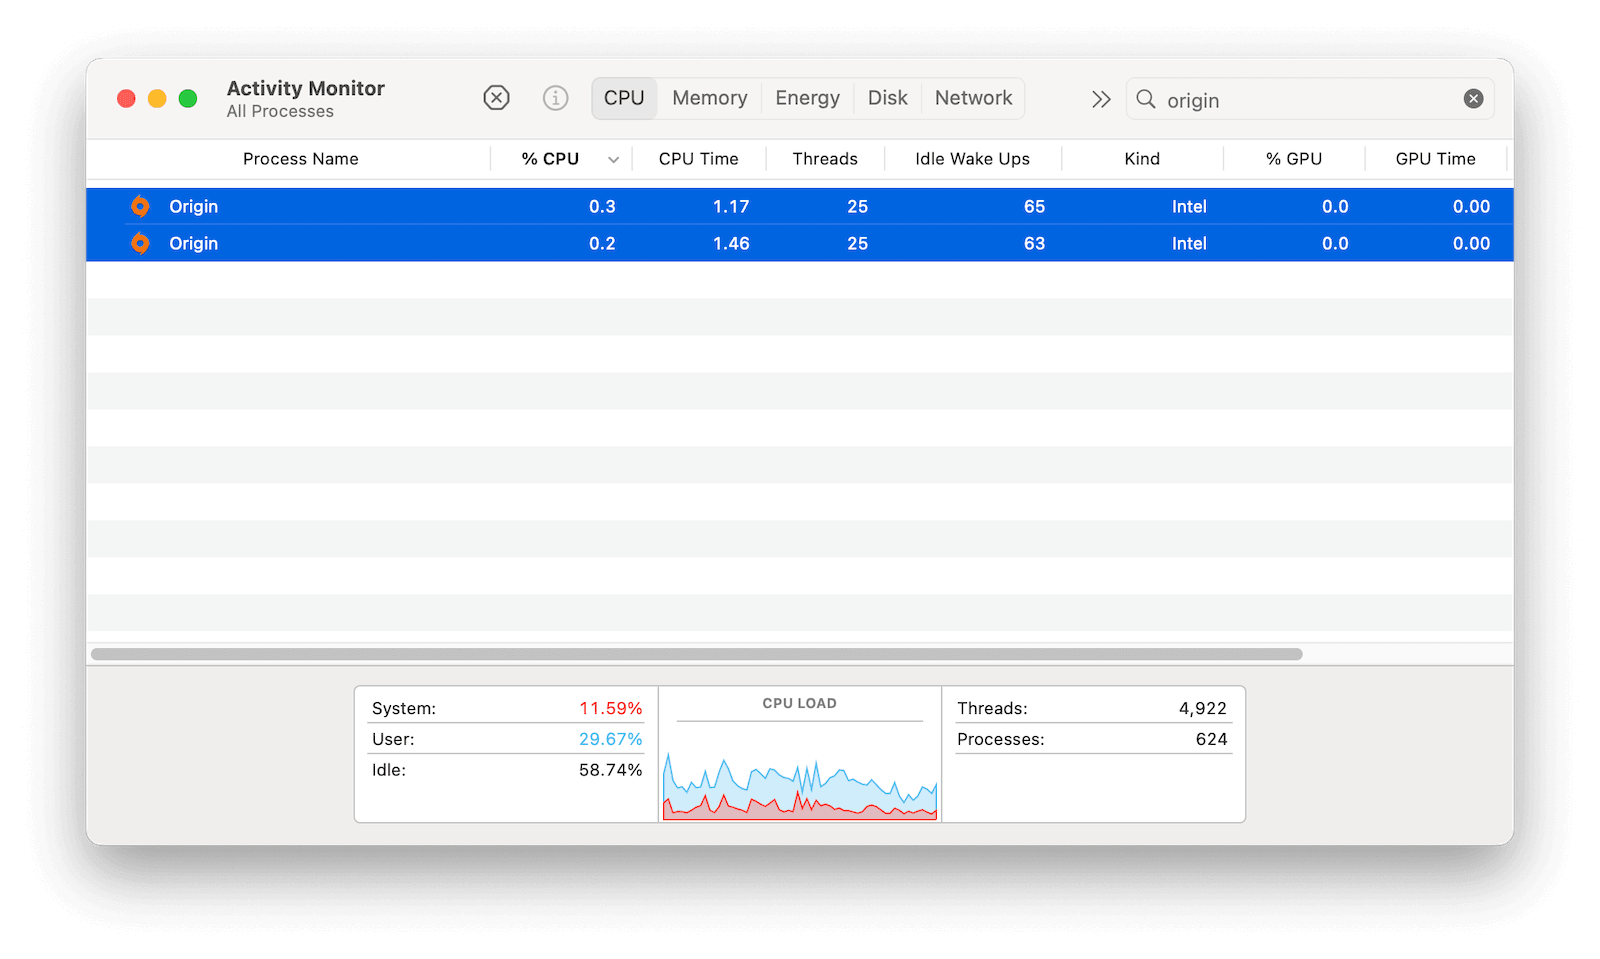 Quit Origin on Mac with Activity Monitor